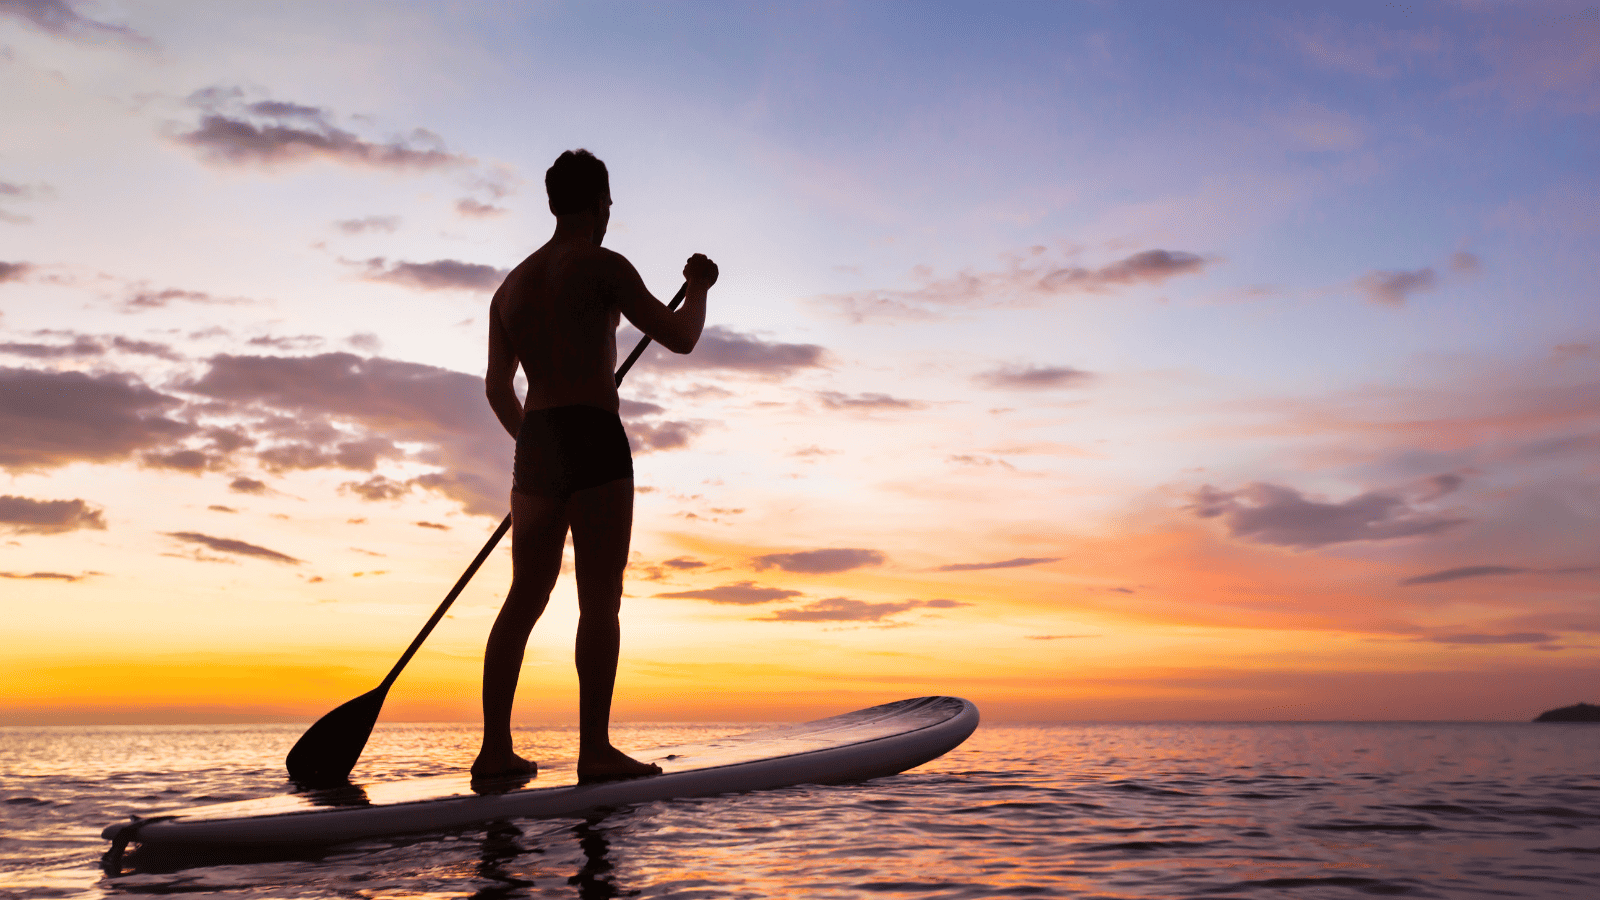 Paddleboard during sunset